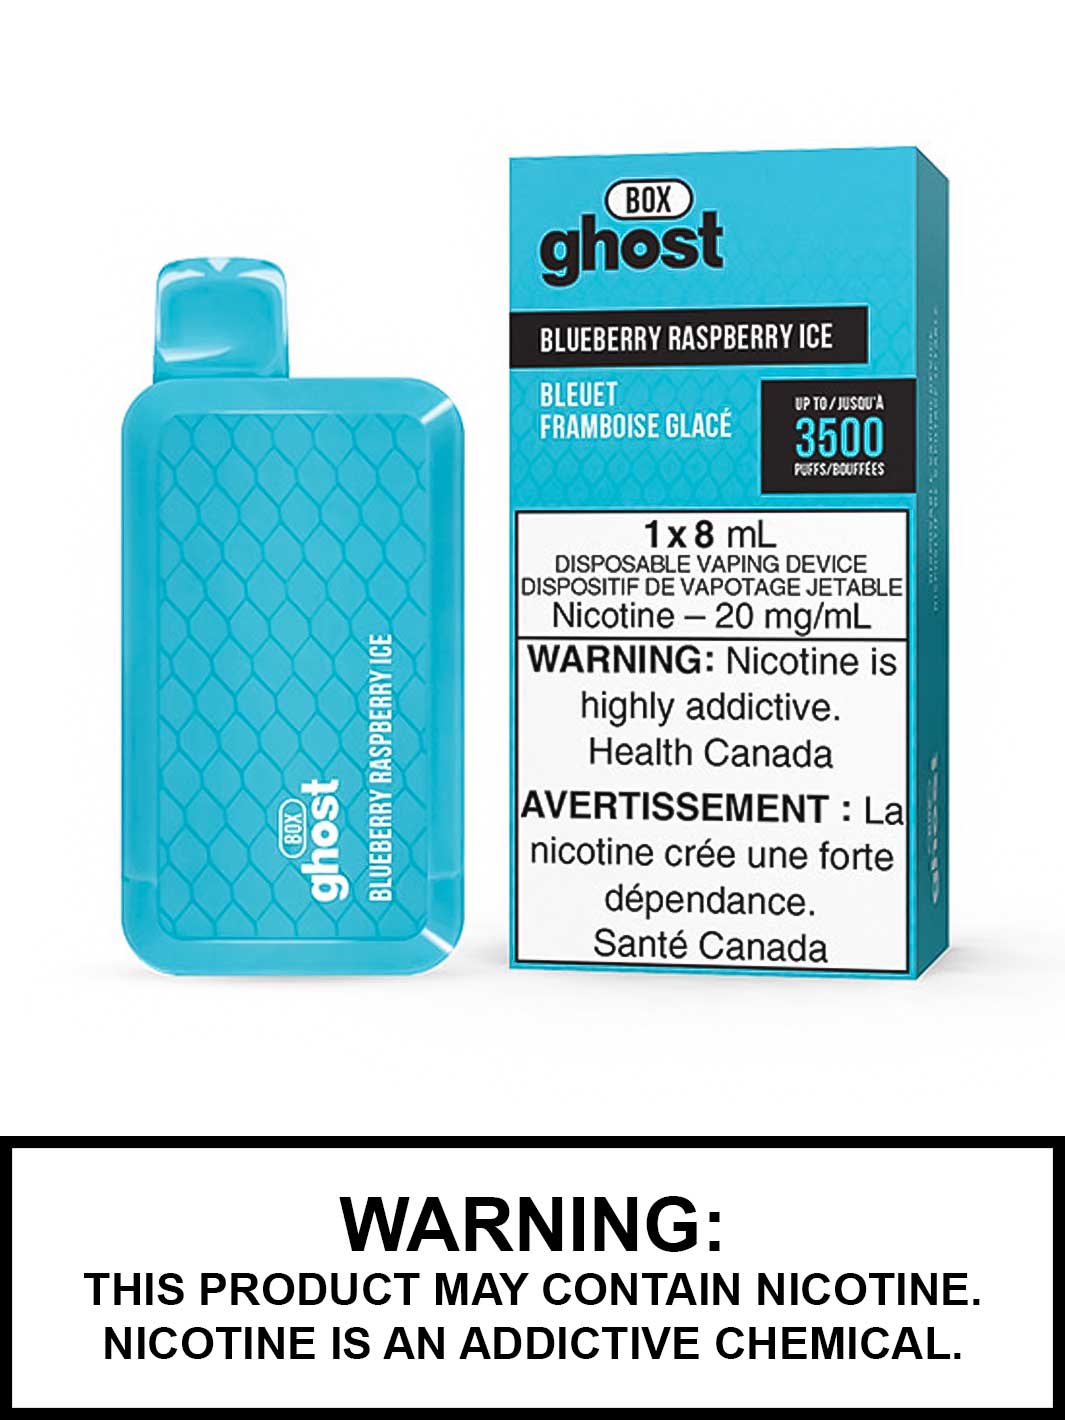 Blueberry Raspberry Ice Ghost Box Disposable Vape, Ghost Box Vape, Ghost Vape, Vape360 Canada